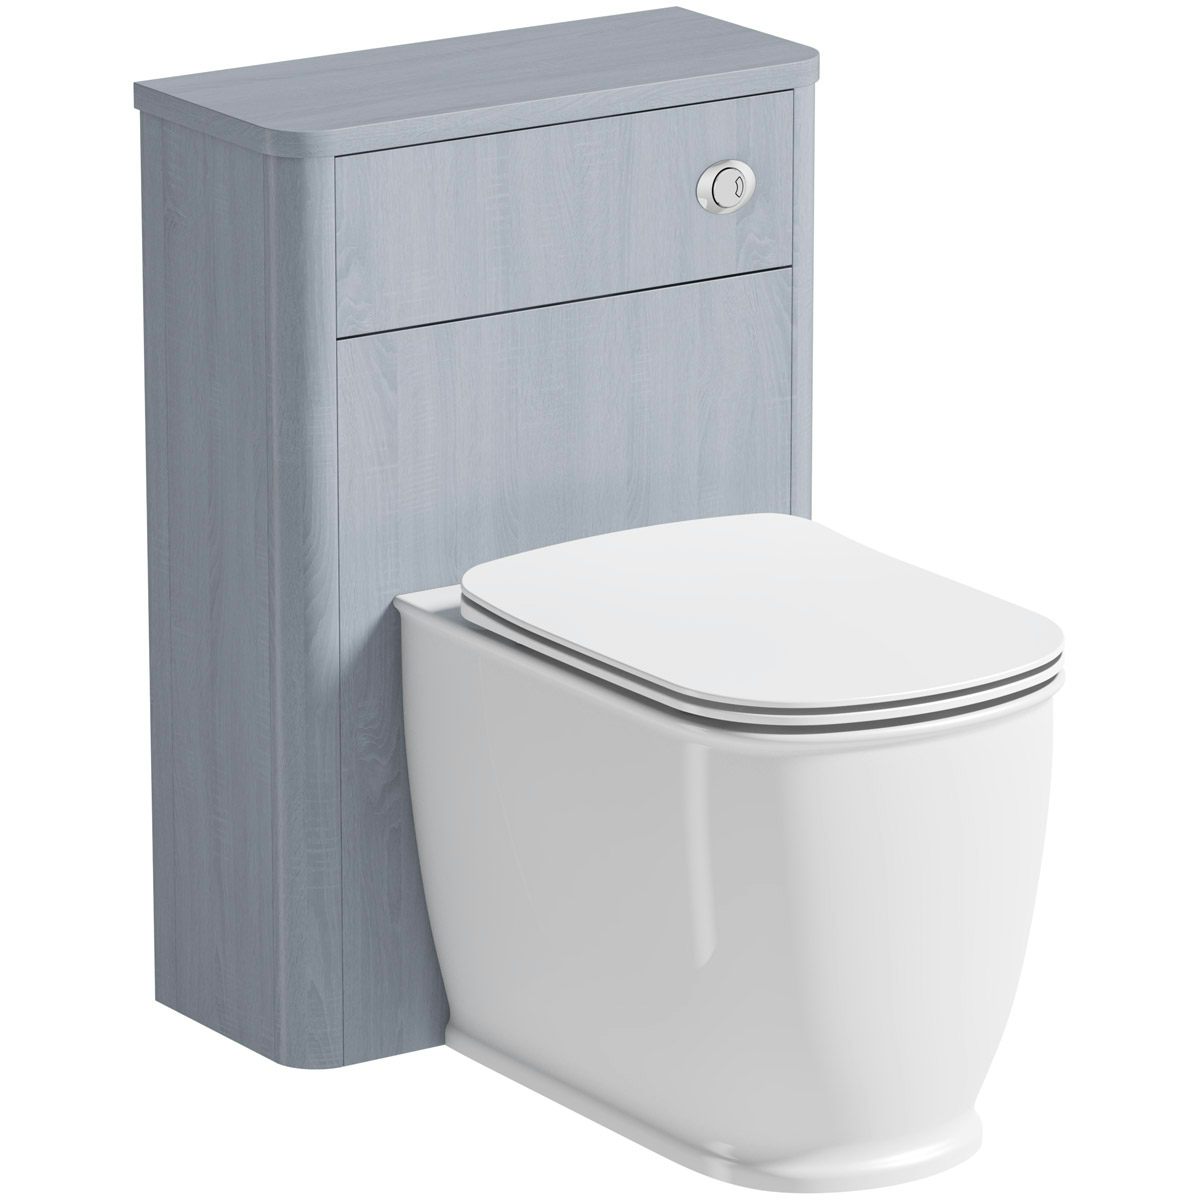 The Bath Co. Beaumont powder blue back to wall unit and toilet with slim soft close seat